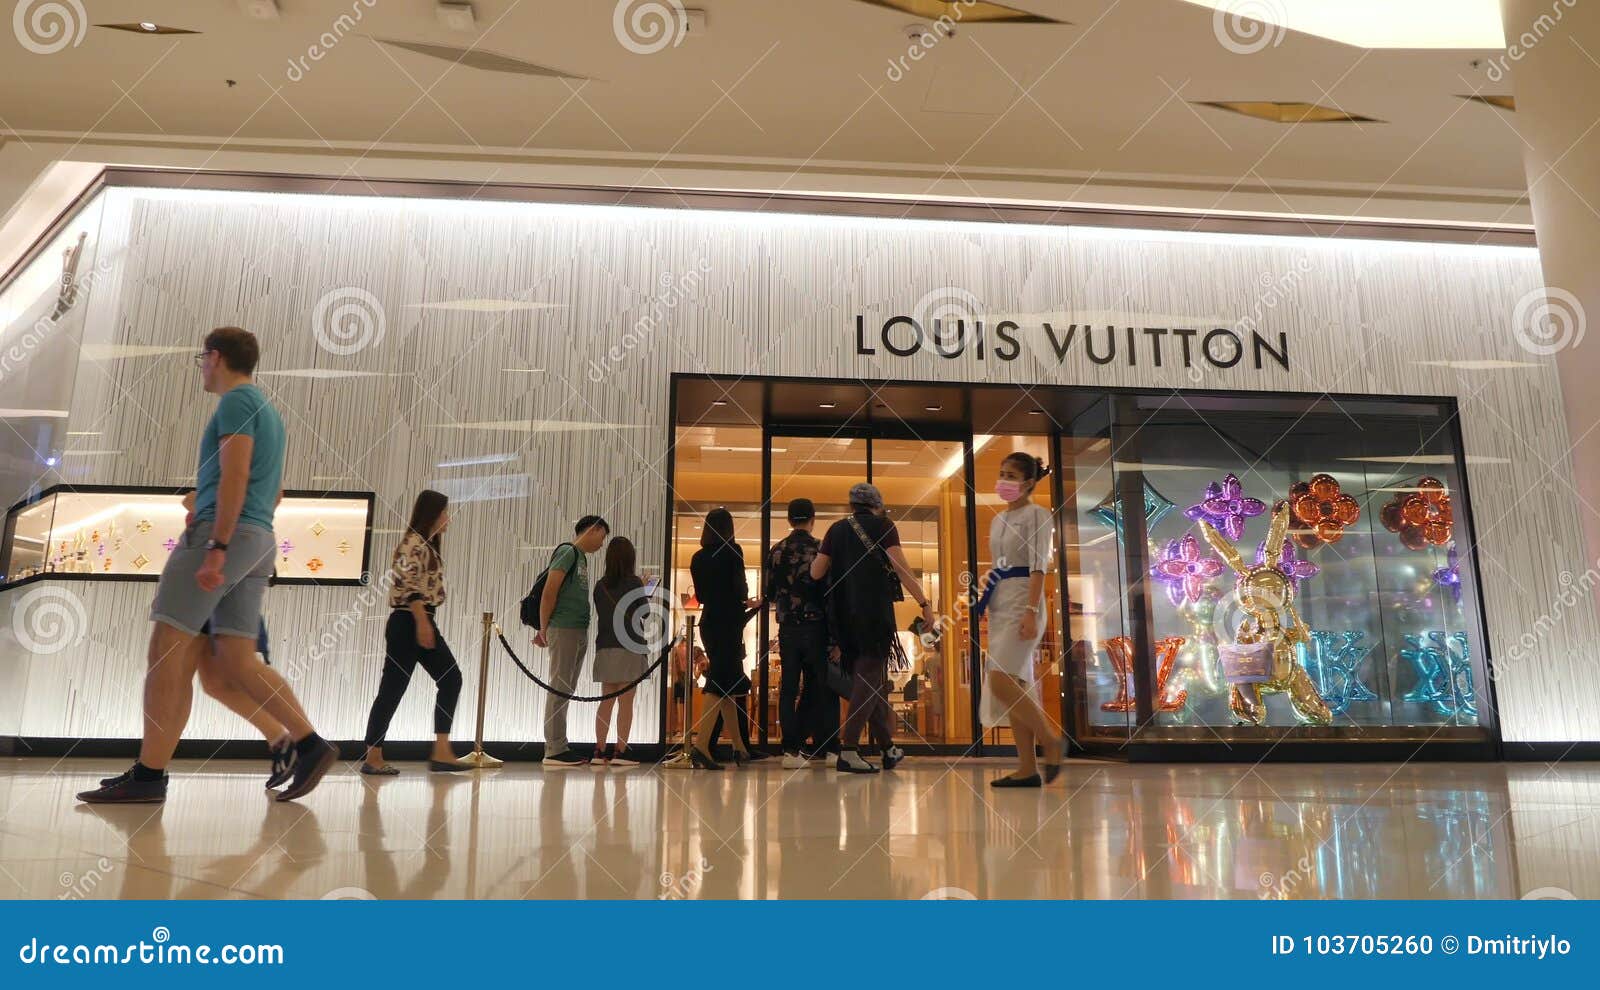 Louis Vuitton Shop, Emporium Shopping Mall, Bangkok, Thailand Stock Photo,  Picture and Royalty Free Image. Image 142316462.